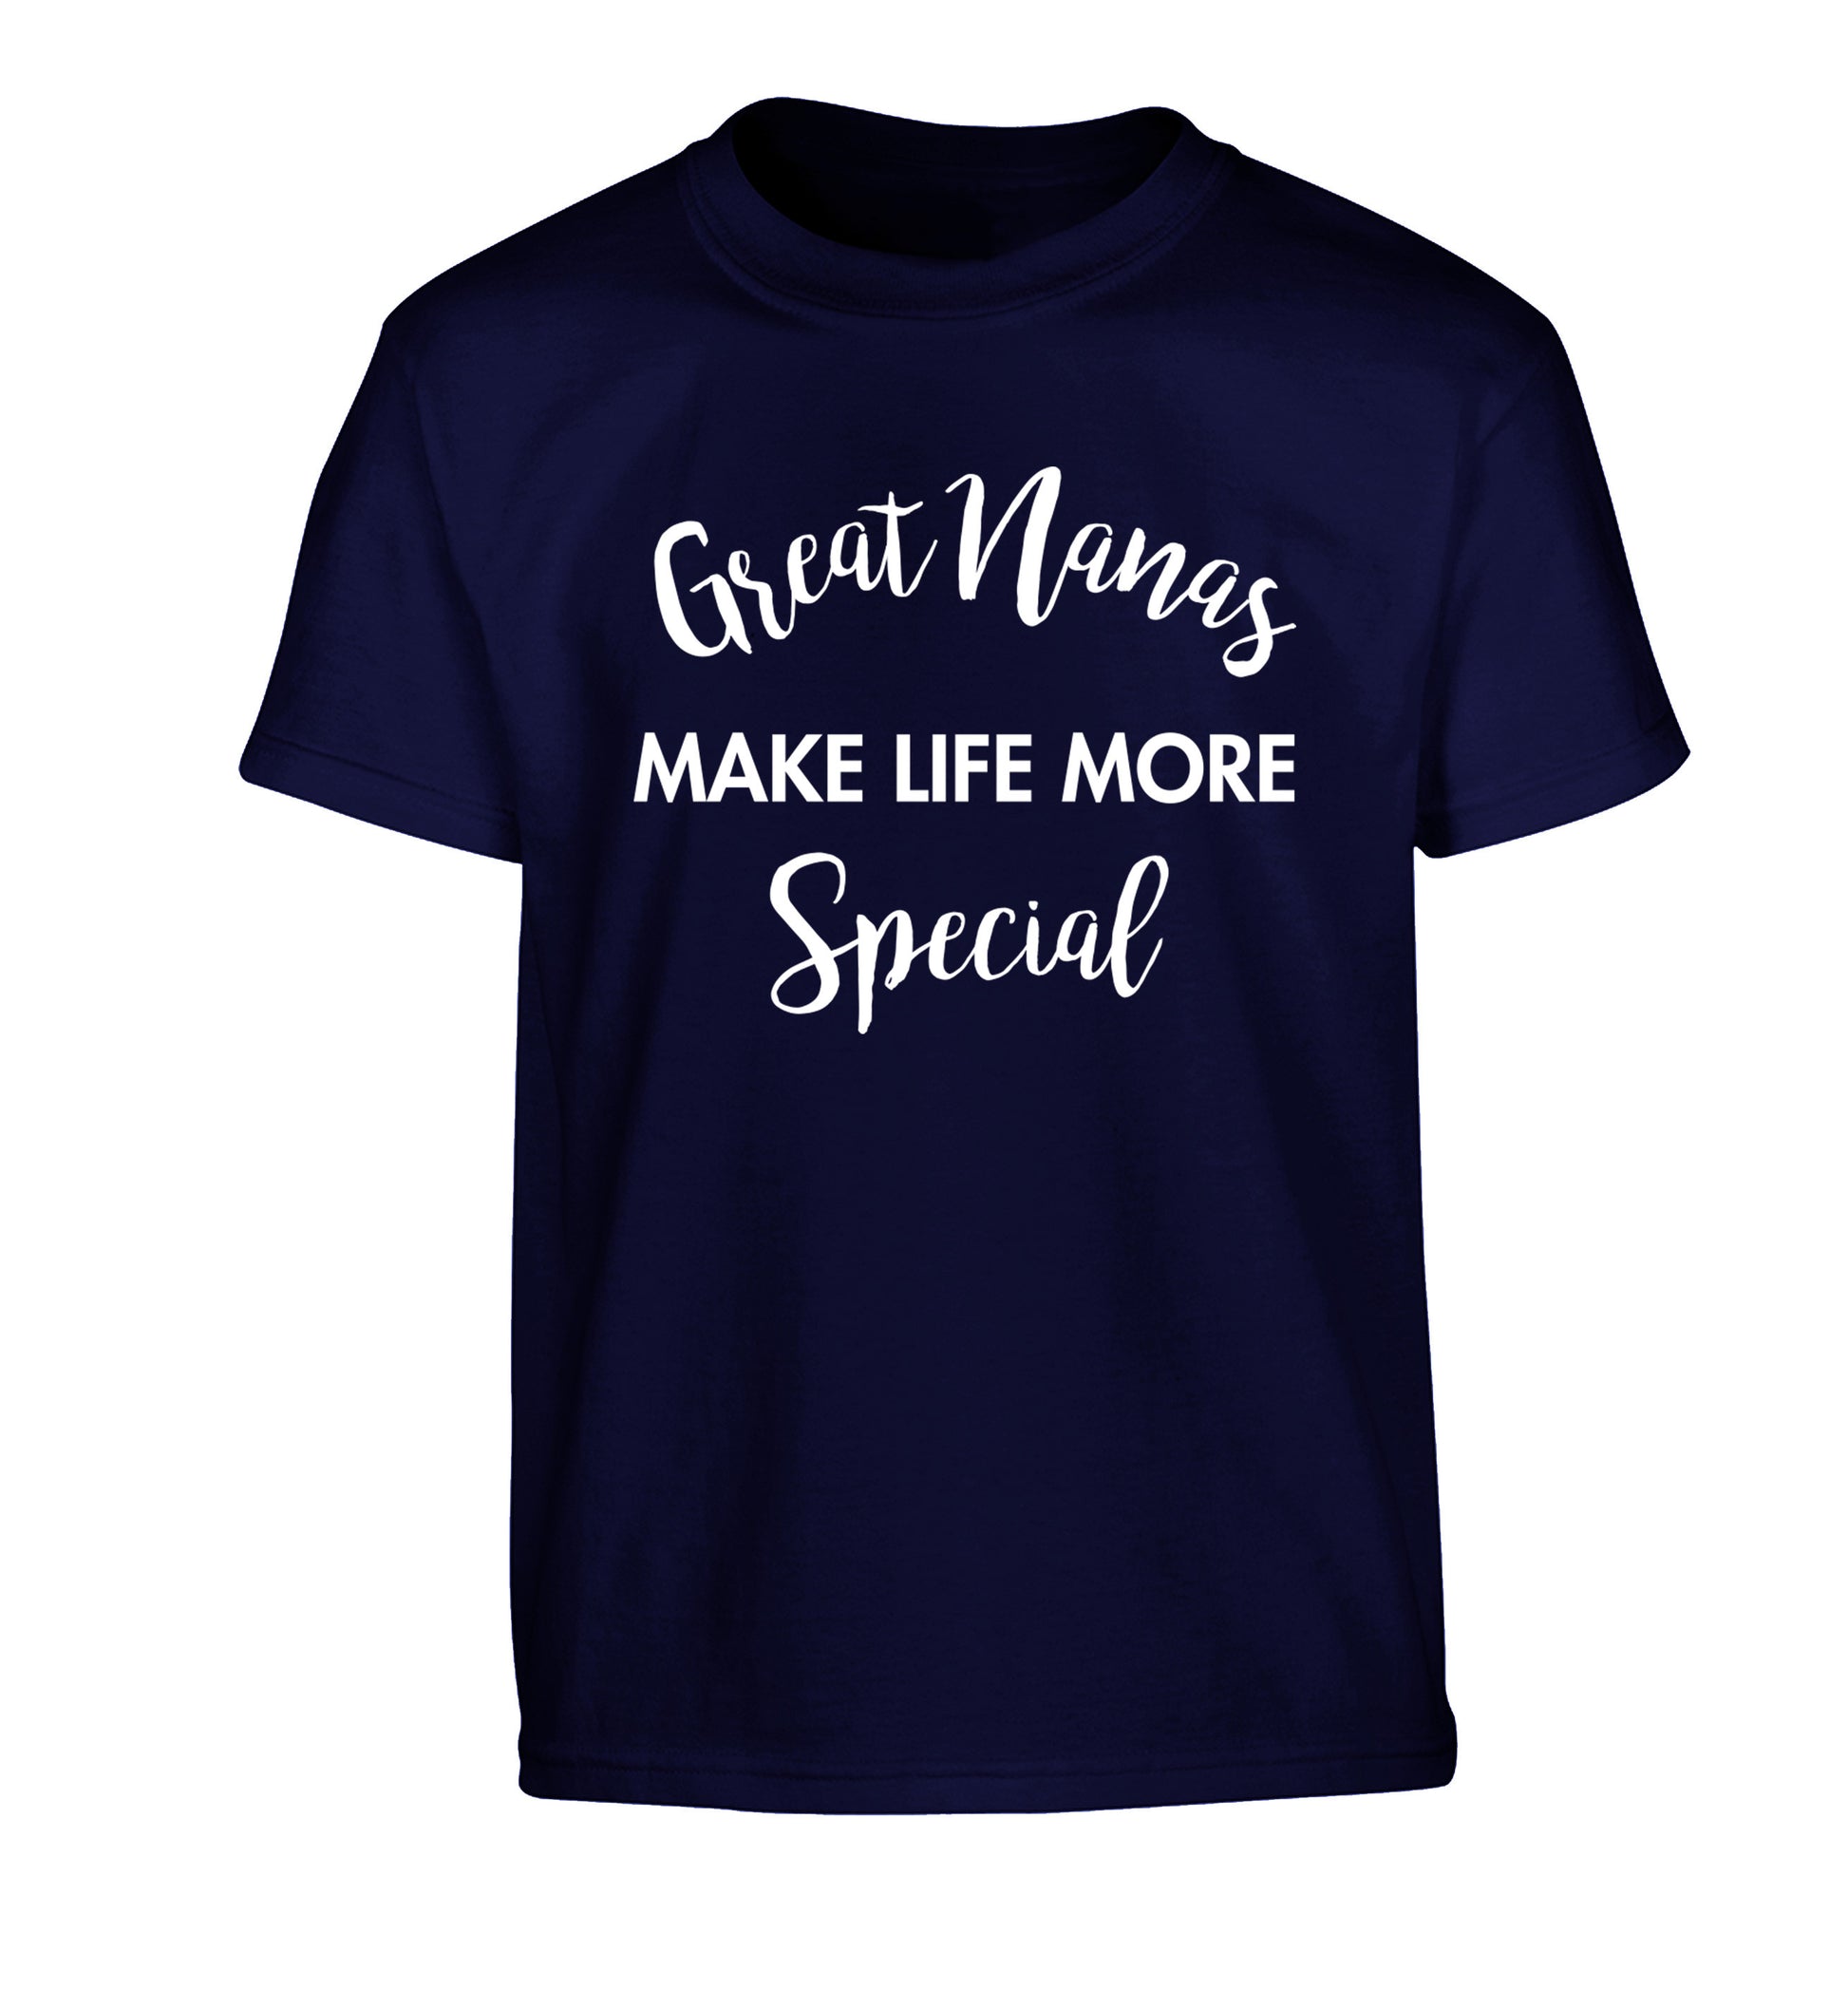 Great nanas make life more special Children's navy Tshirt 12-14 Years